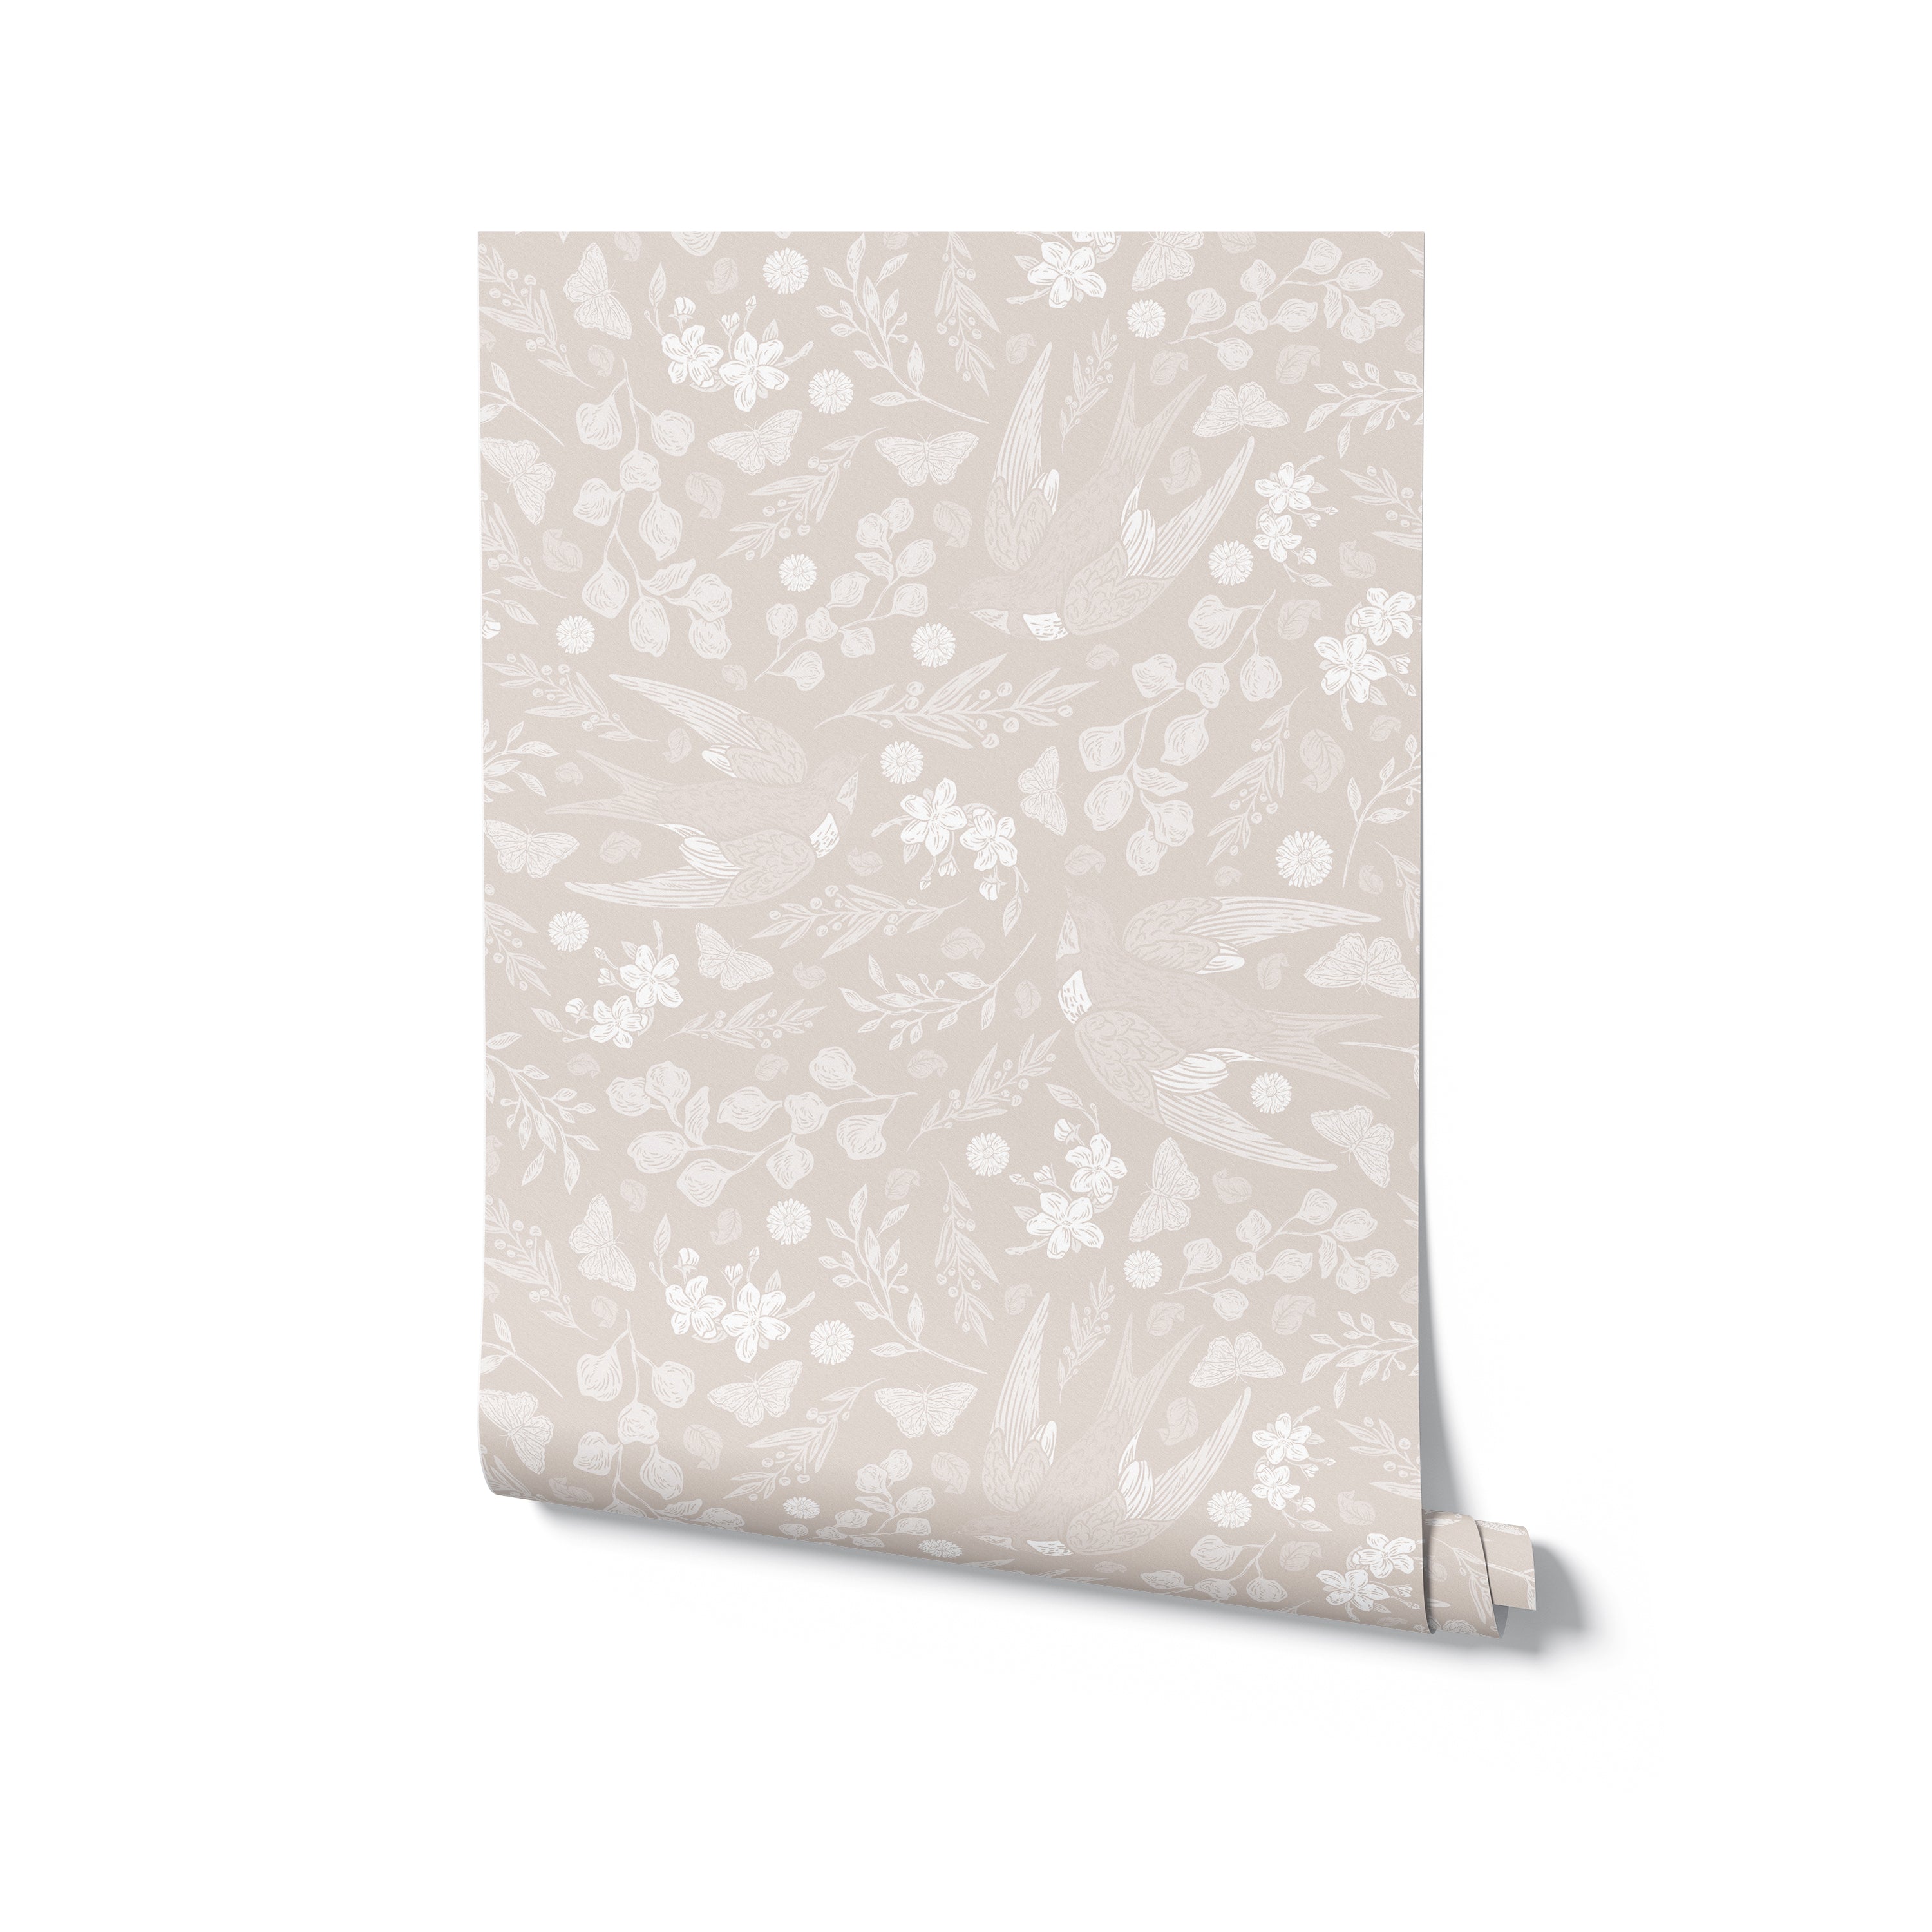 A roll of Vintage Swift Wallpaper displaying a detailed print of birds and leaves in golden tones on a light neutral background, symbolizing elegance and a touch of nature.